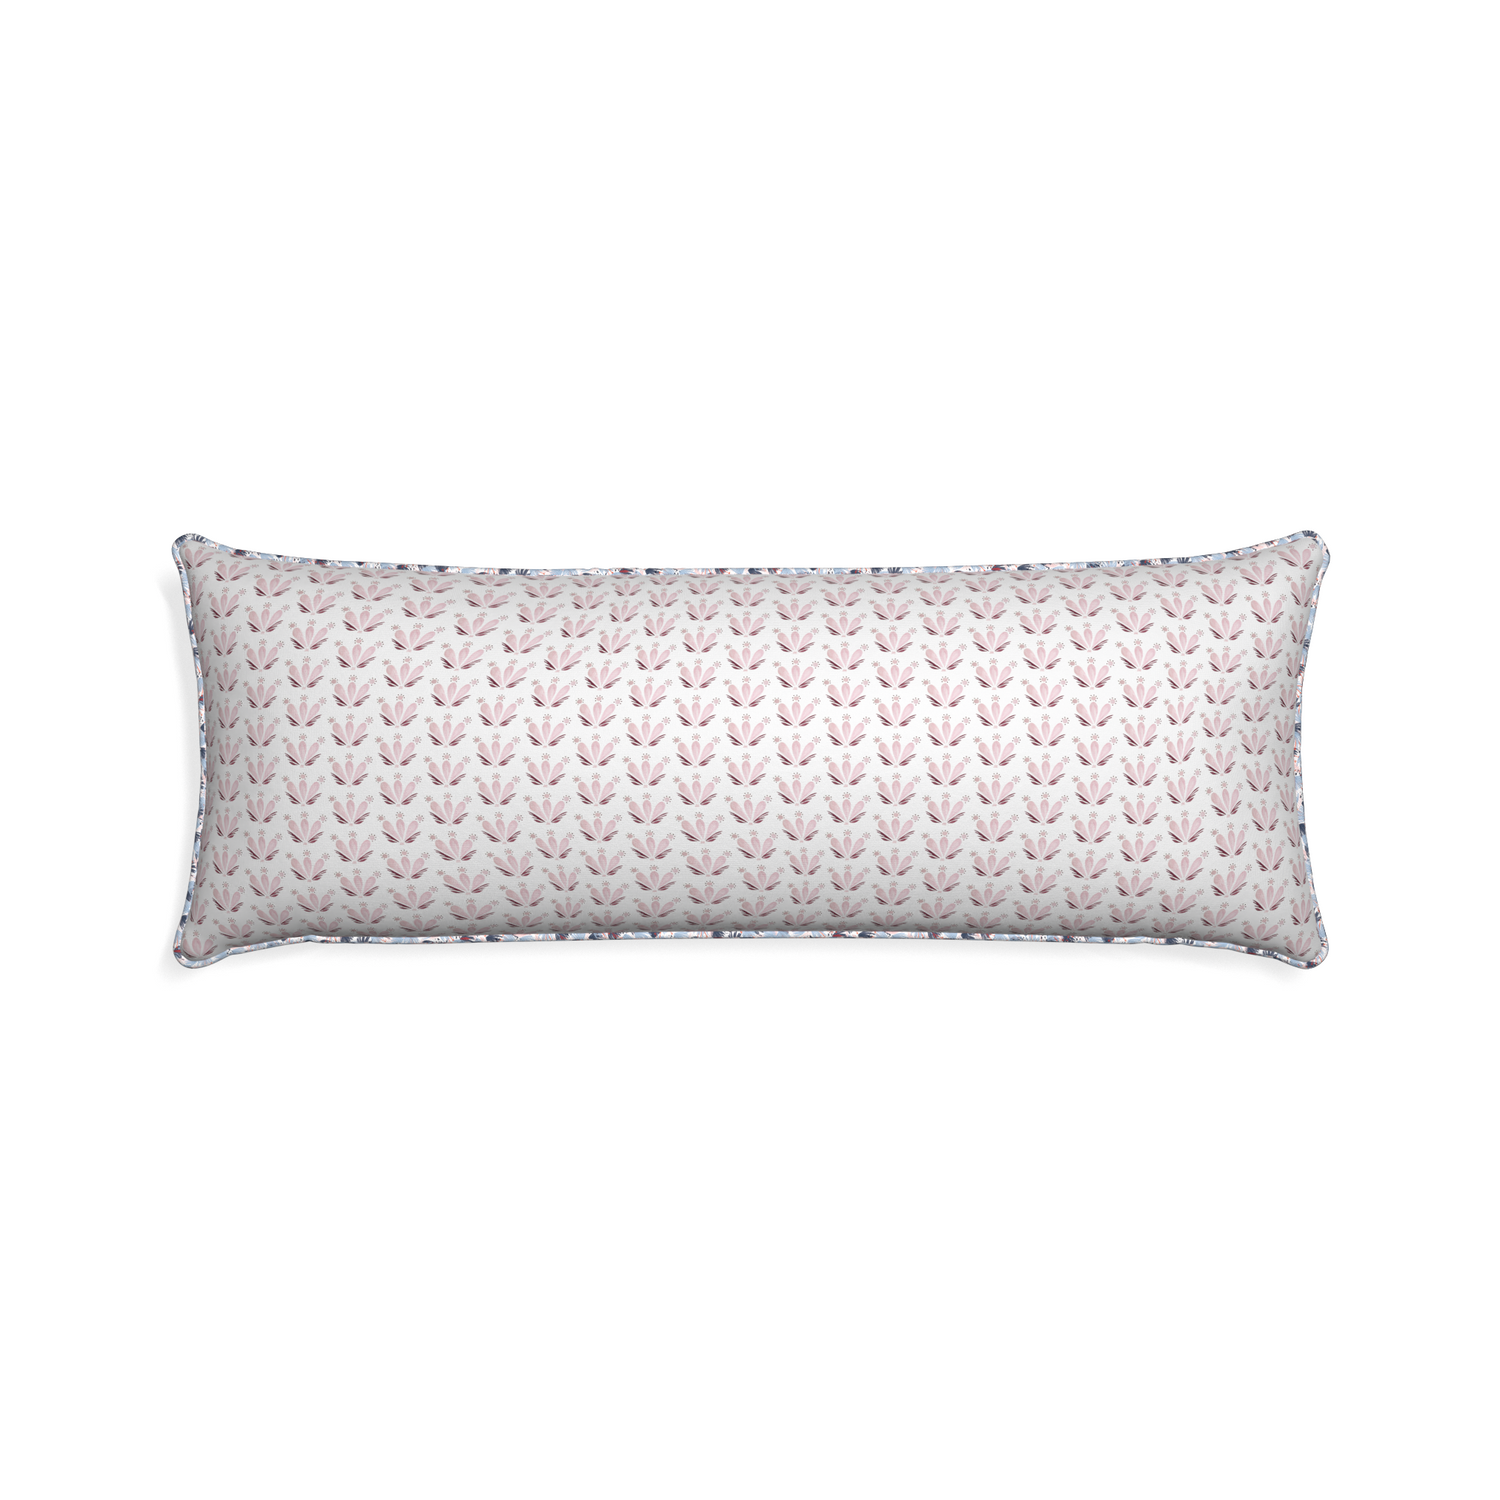 Xl-lumbar serena pink custom pink & burgundy drop repeat floralpillow with e piping on white background